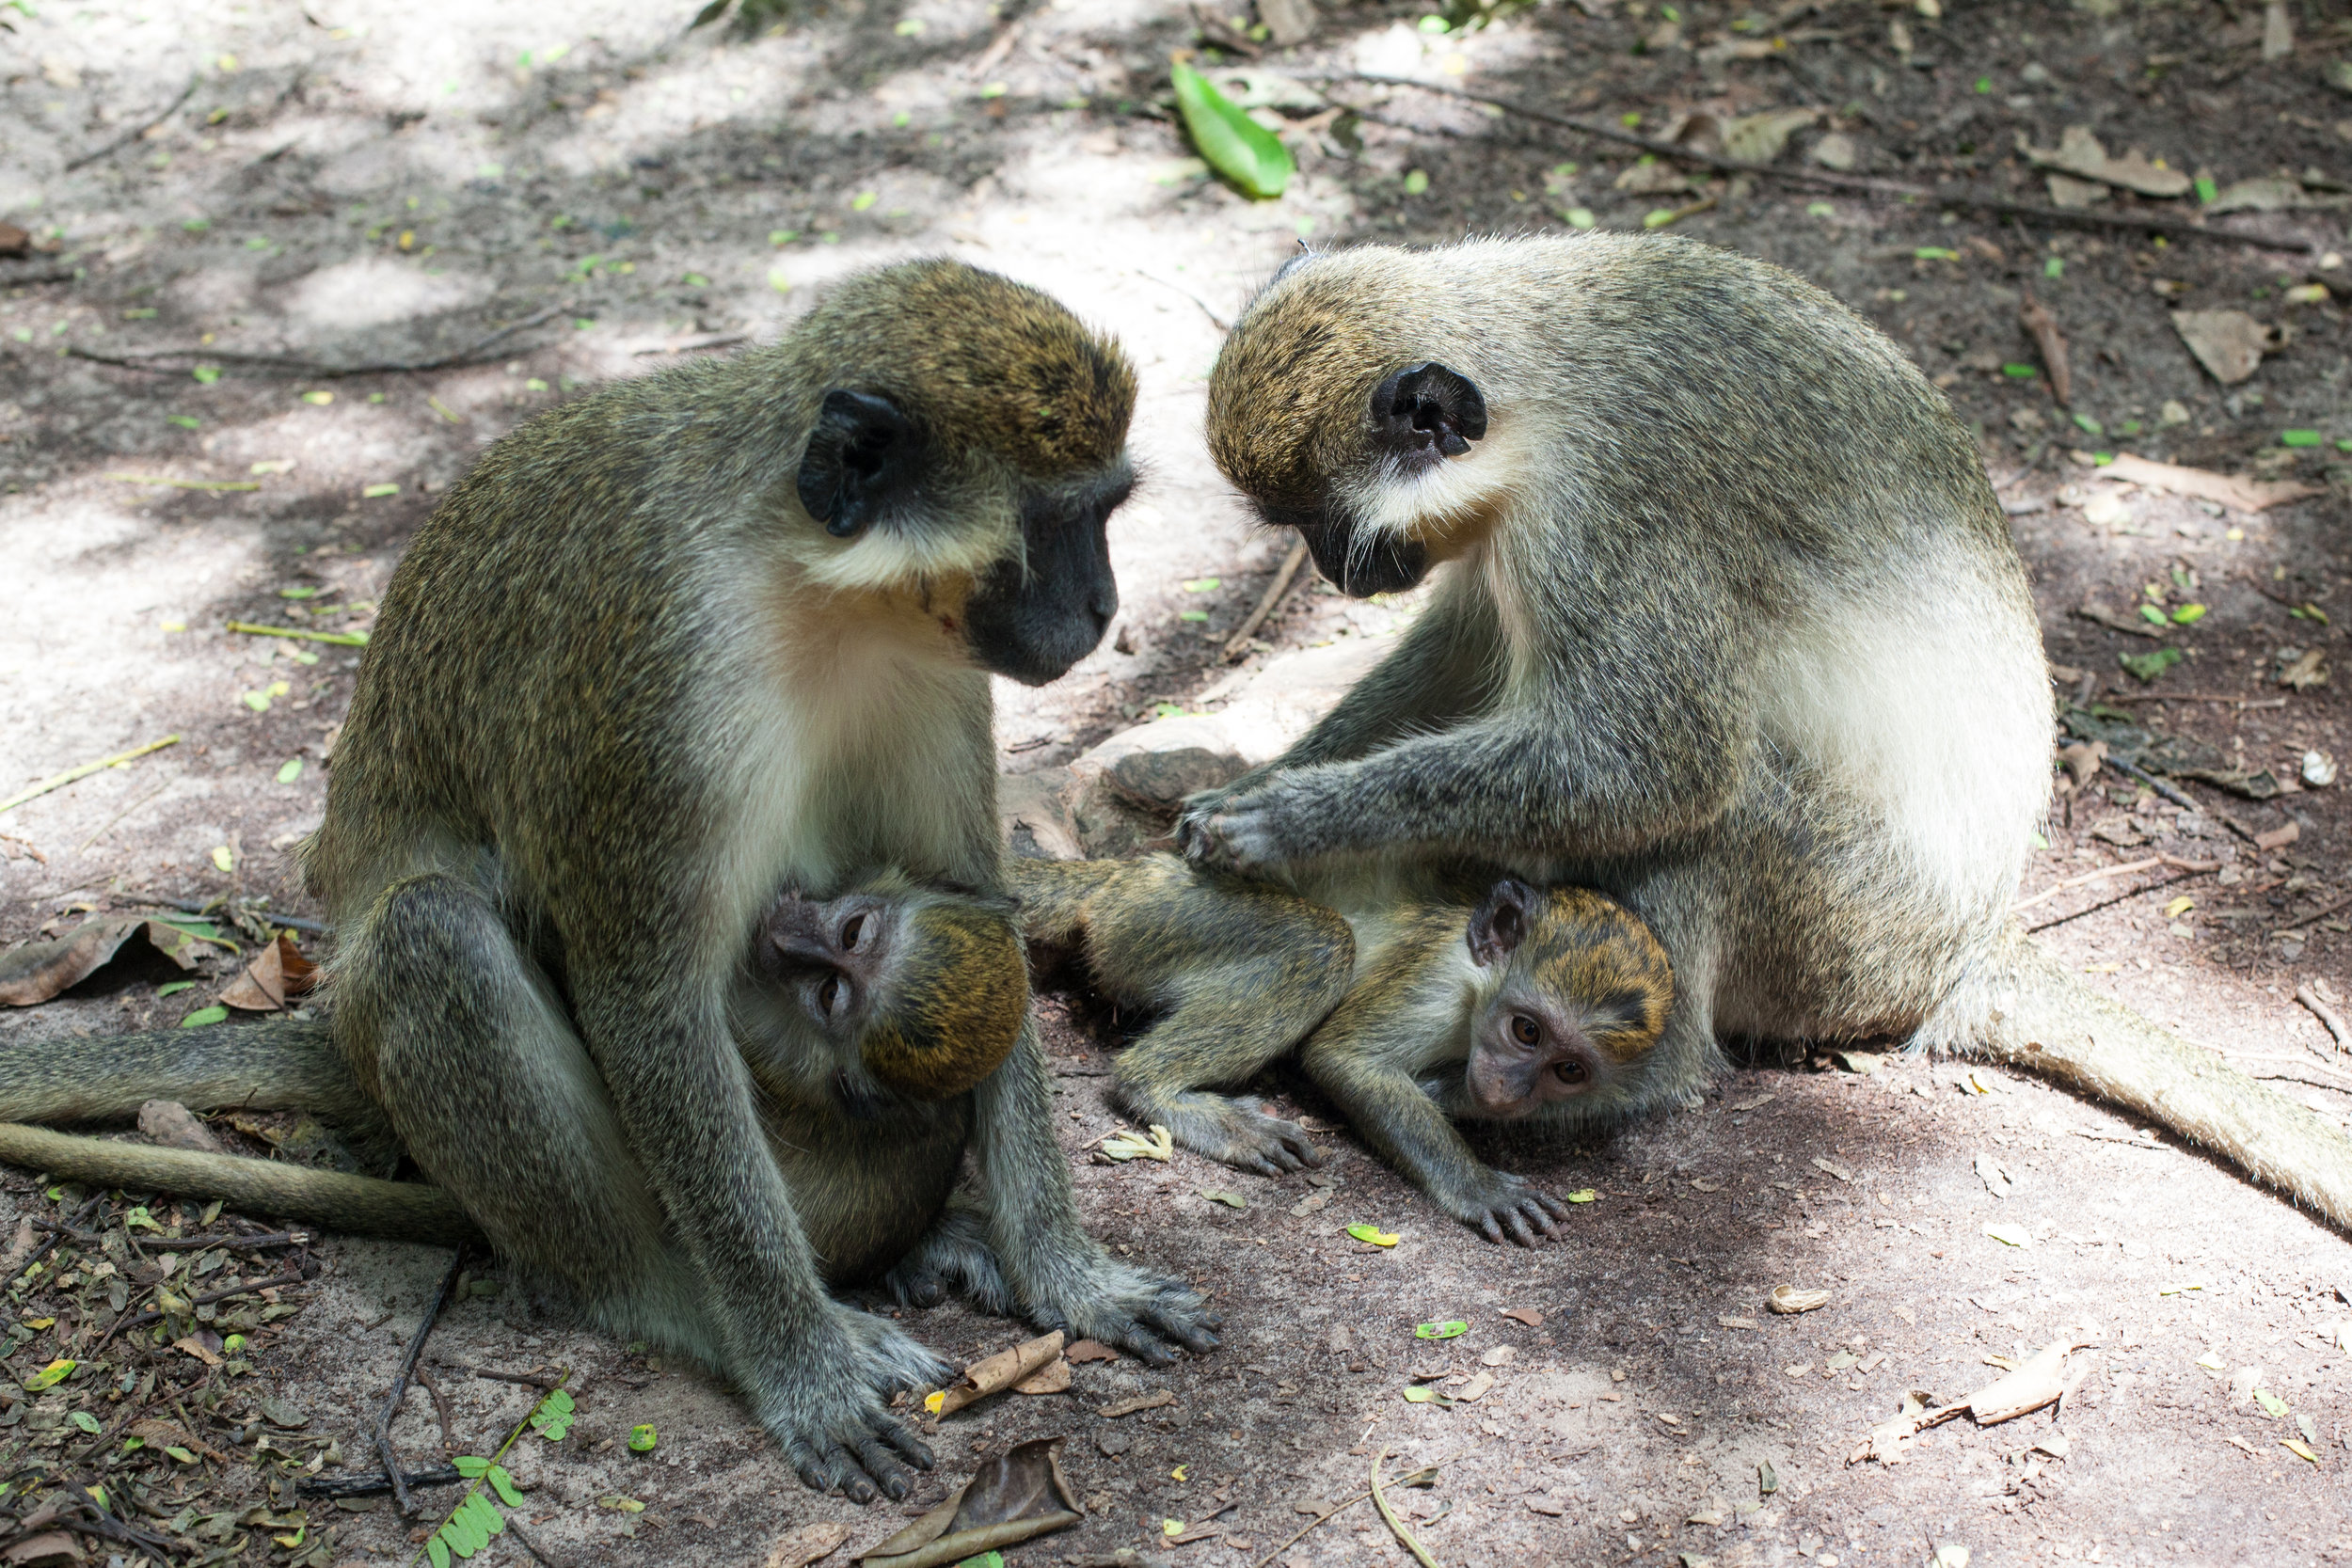 Monkeys at the Bijilo Forest Park, The Gambia